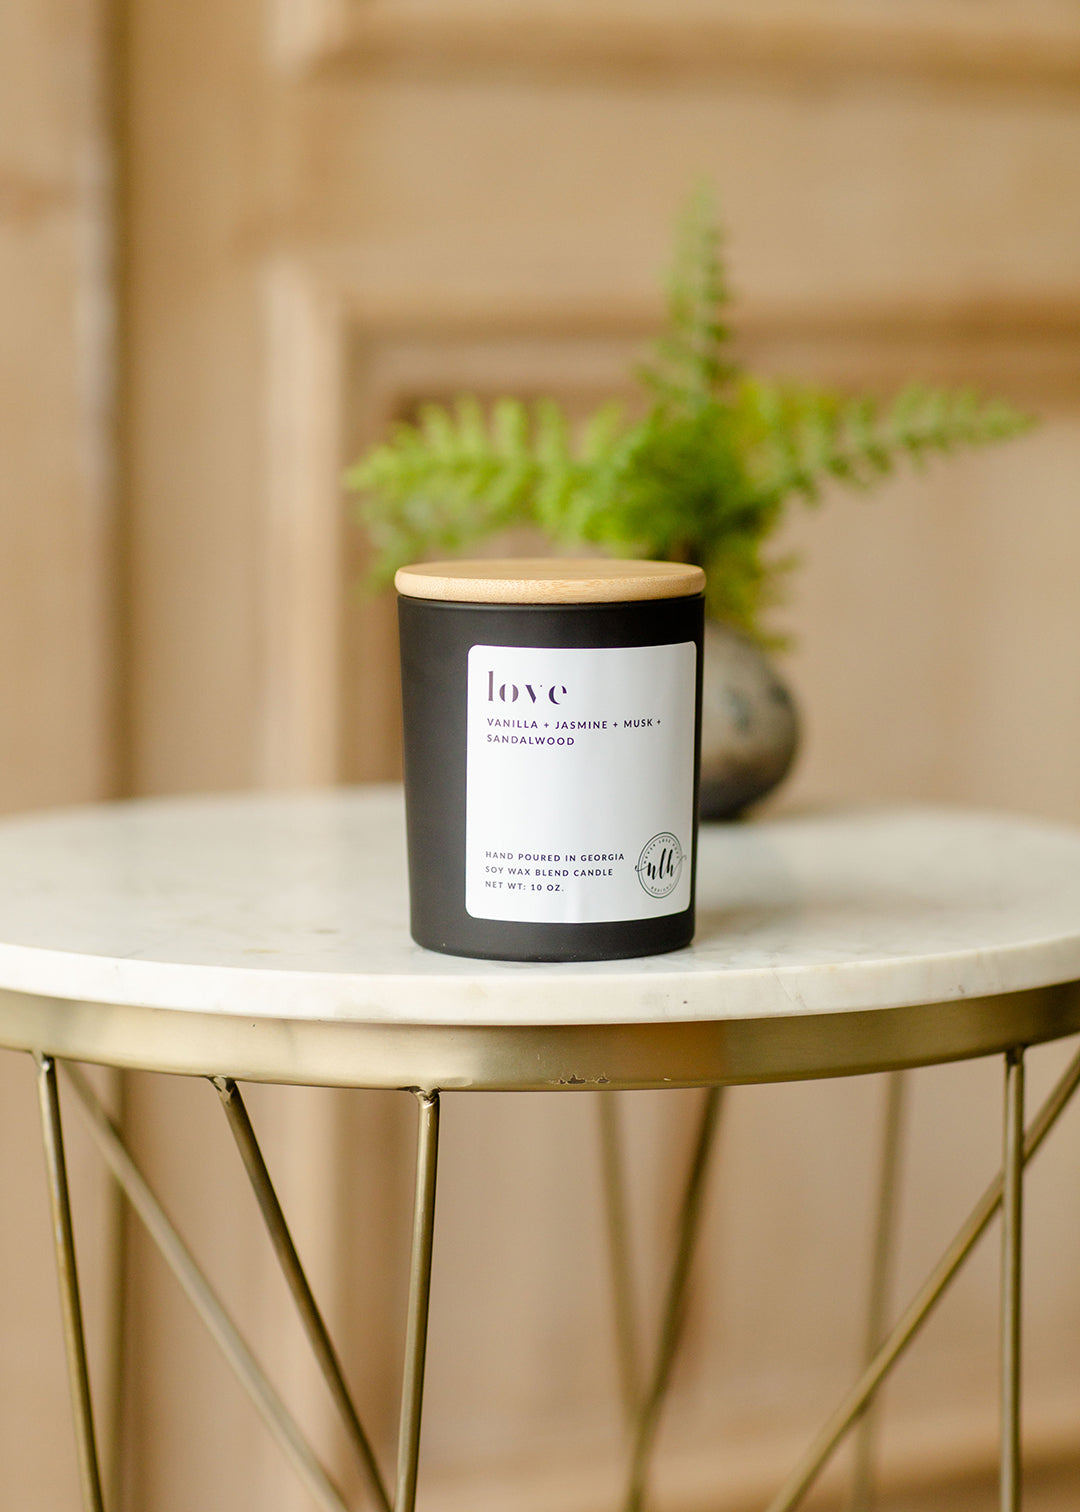 Fruits of the Spirit + Inspirational Soy Wax Candles - FINAL SALE Accessories Love